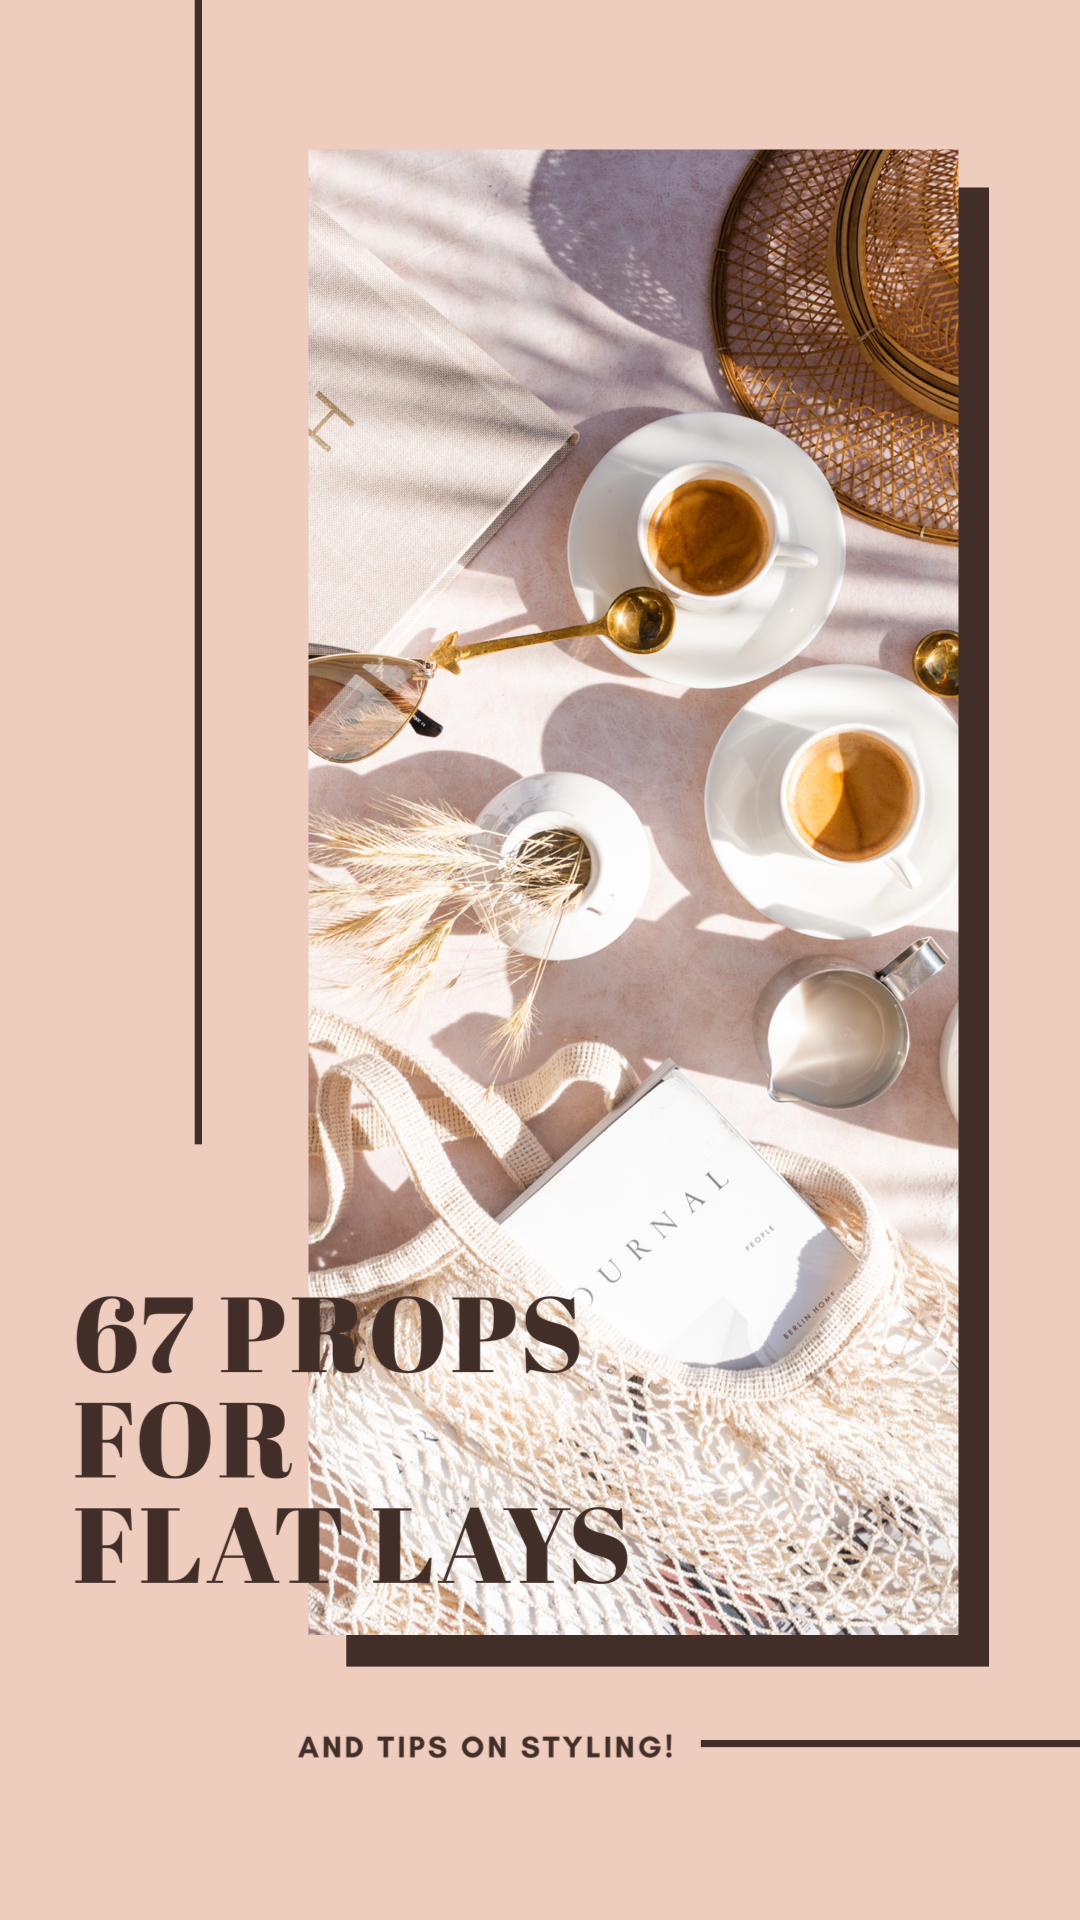 67 props for flat lays